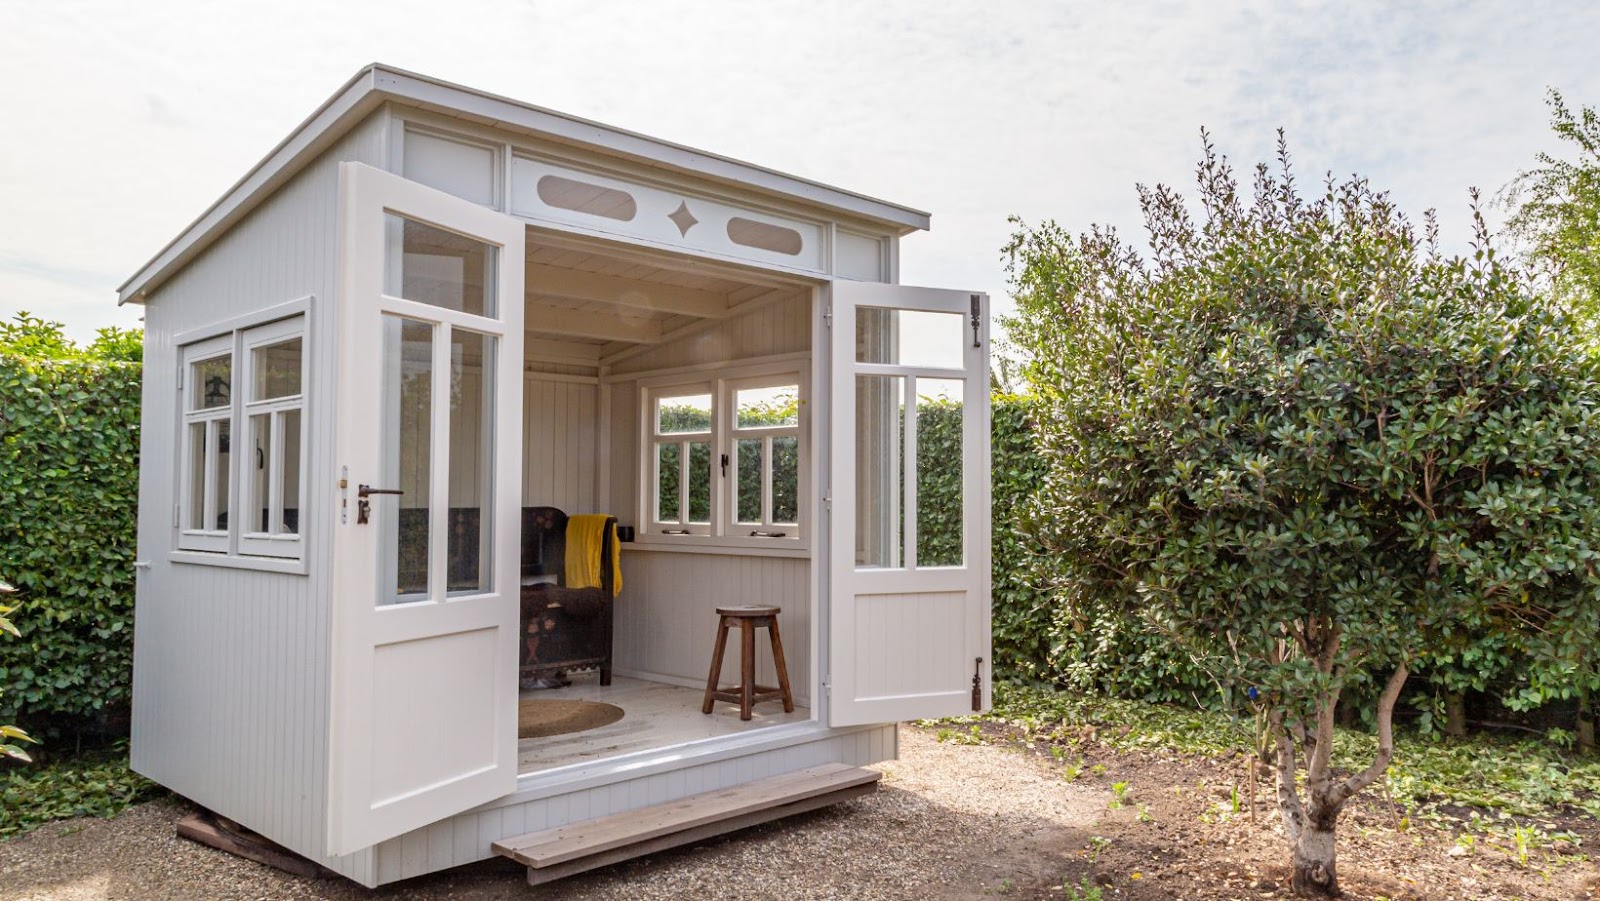 The Challenges of Converting a Shed Into a House